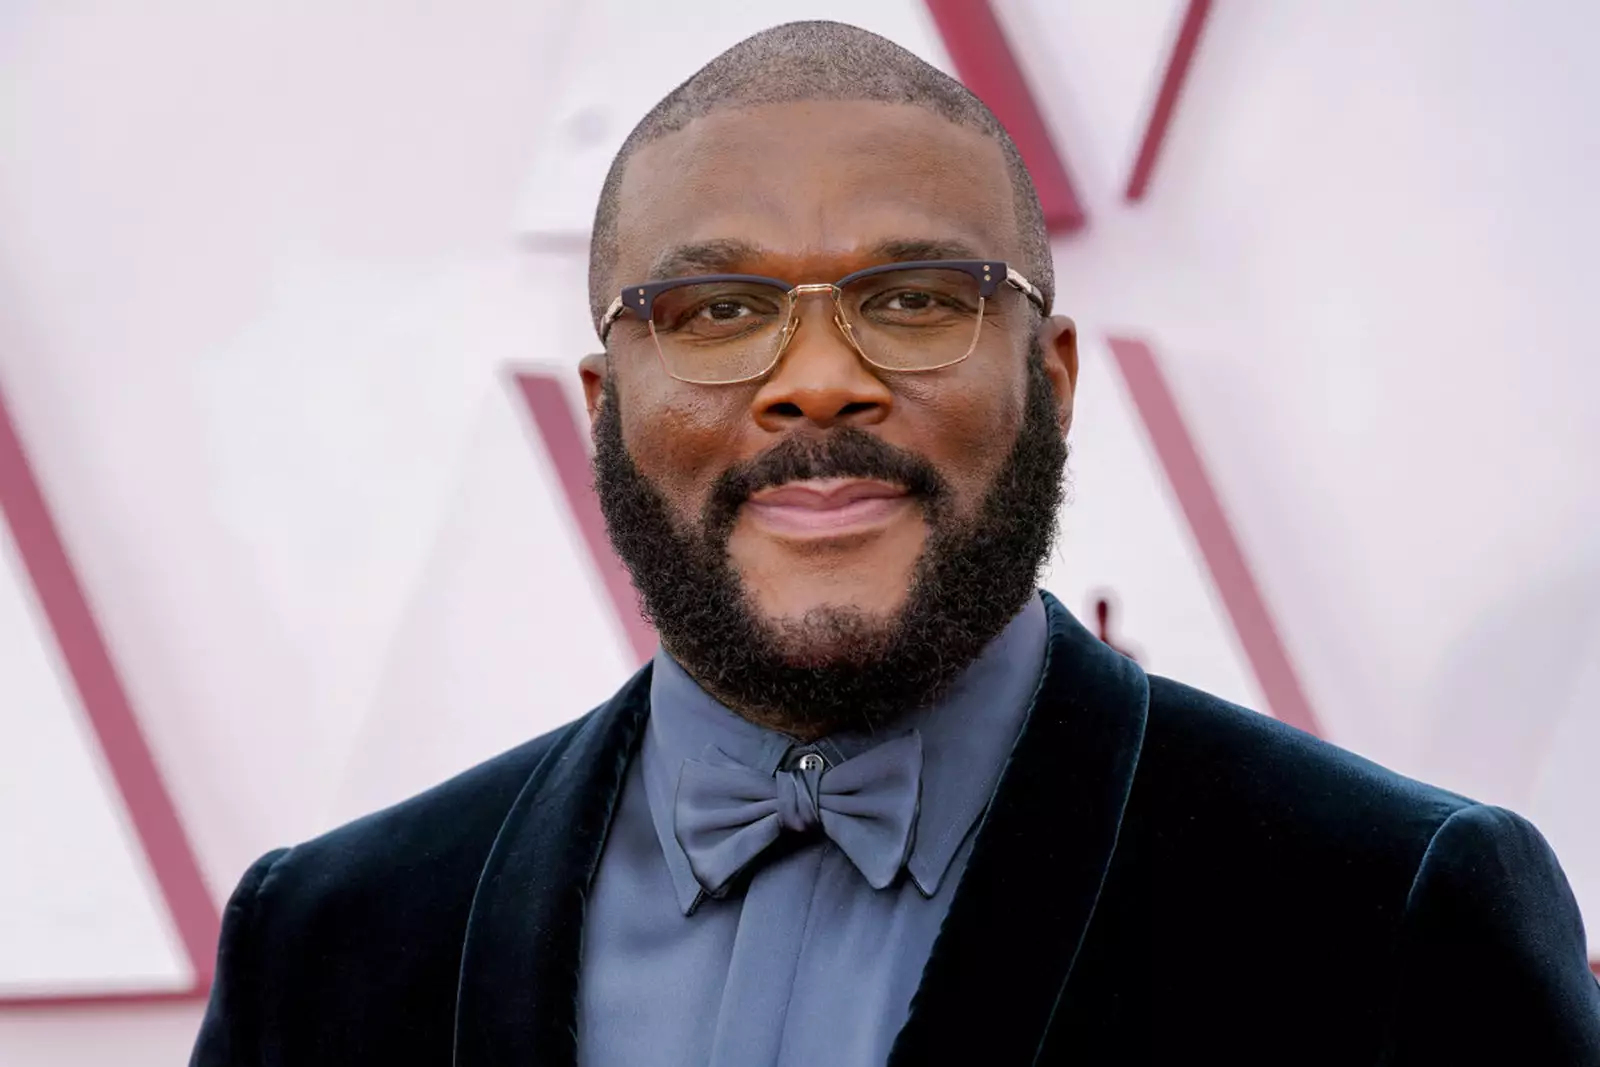 EVEN TYLER PERRY COULDN'T MISS THE "RENAISSANCE" TOUR KICKOFF 15